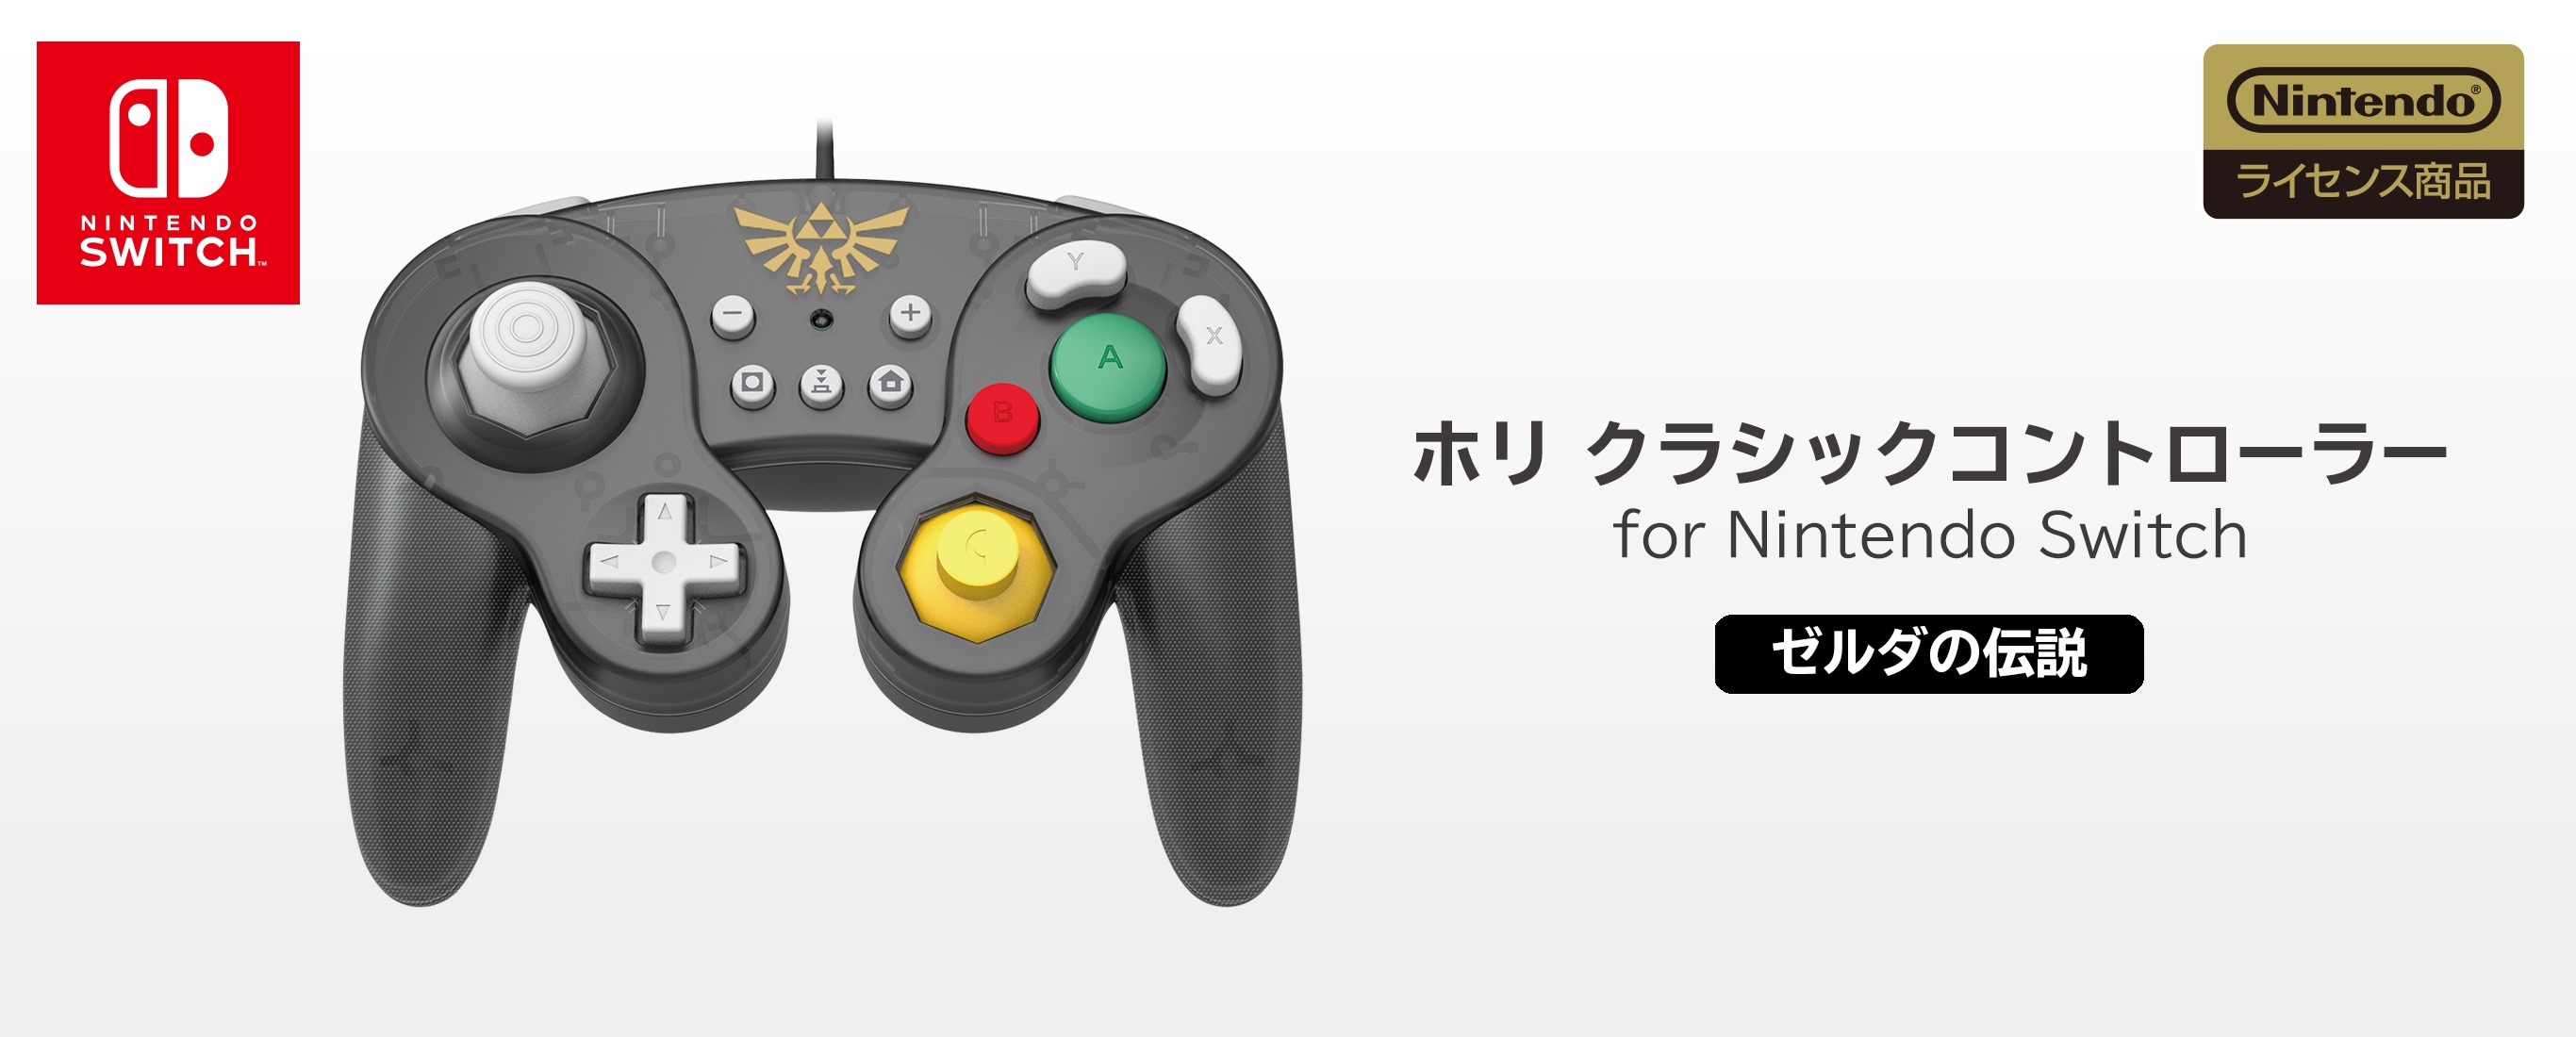 Hori To Release Classic GameCube-Style Controllers For Nintendo Switch In  October - Siliconera | Nintendo-Switch-Controller